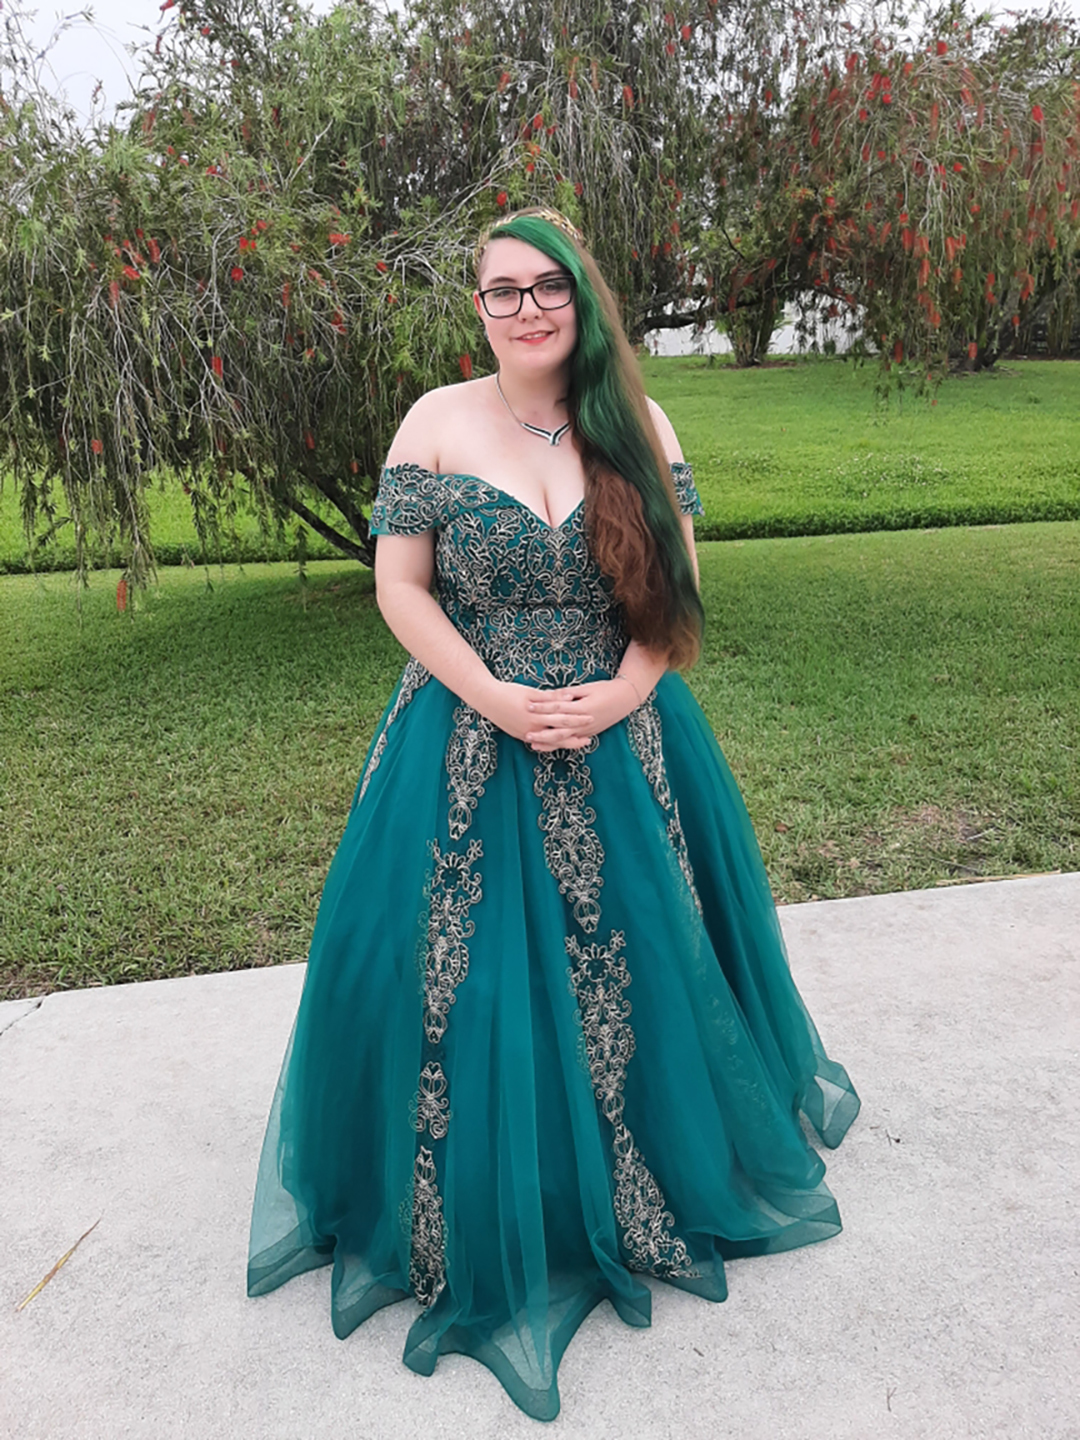 Cassidee Calamaras, a senior at Lakewood Ranch High School, loved shopping for a prom dress with her mom.